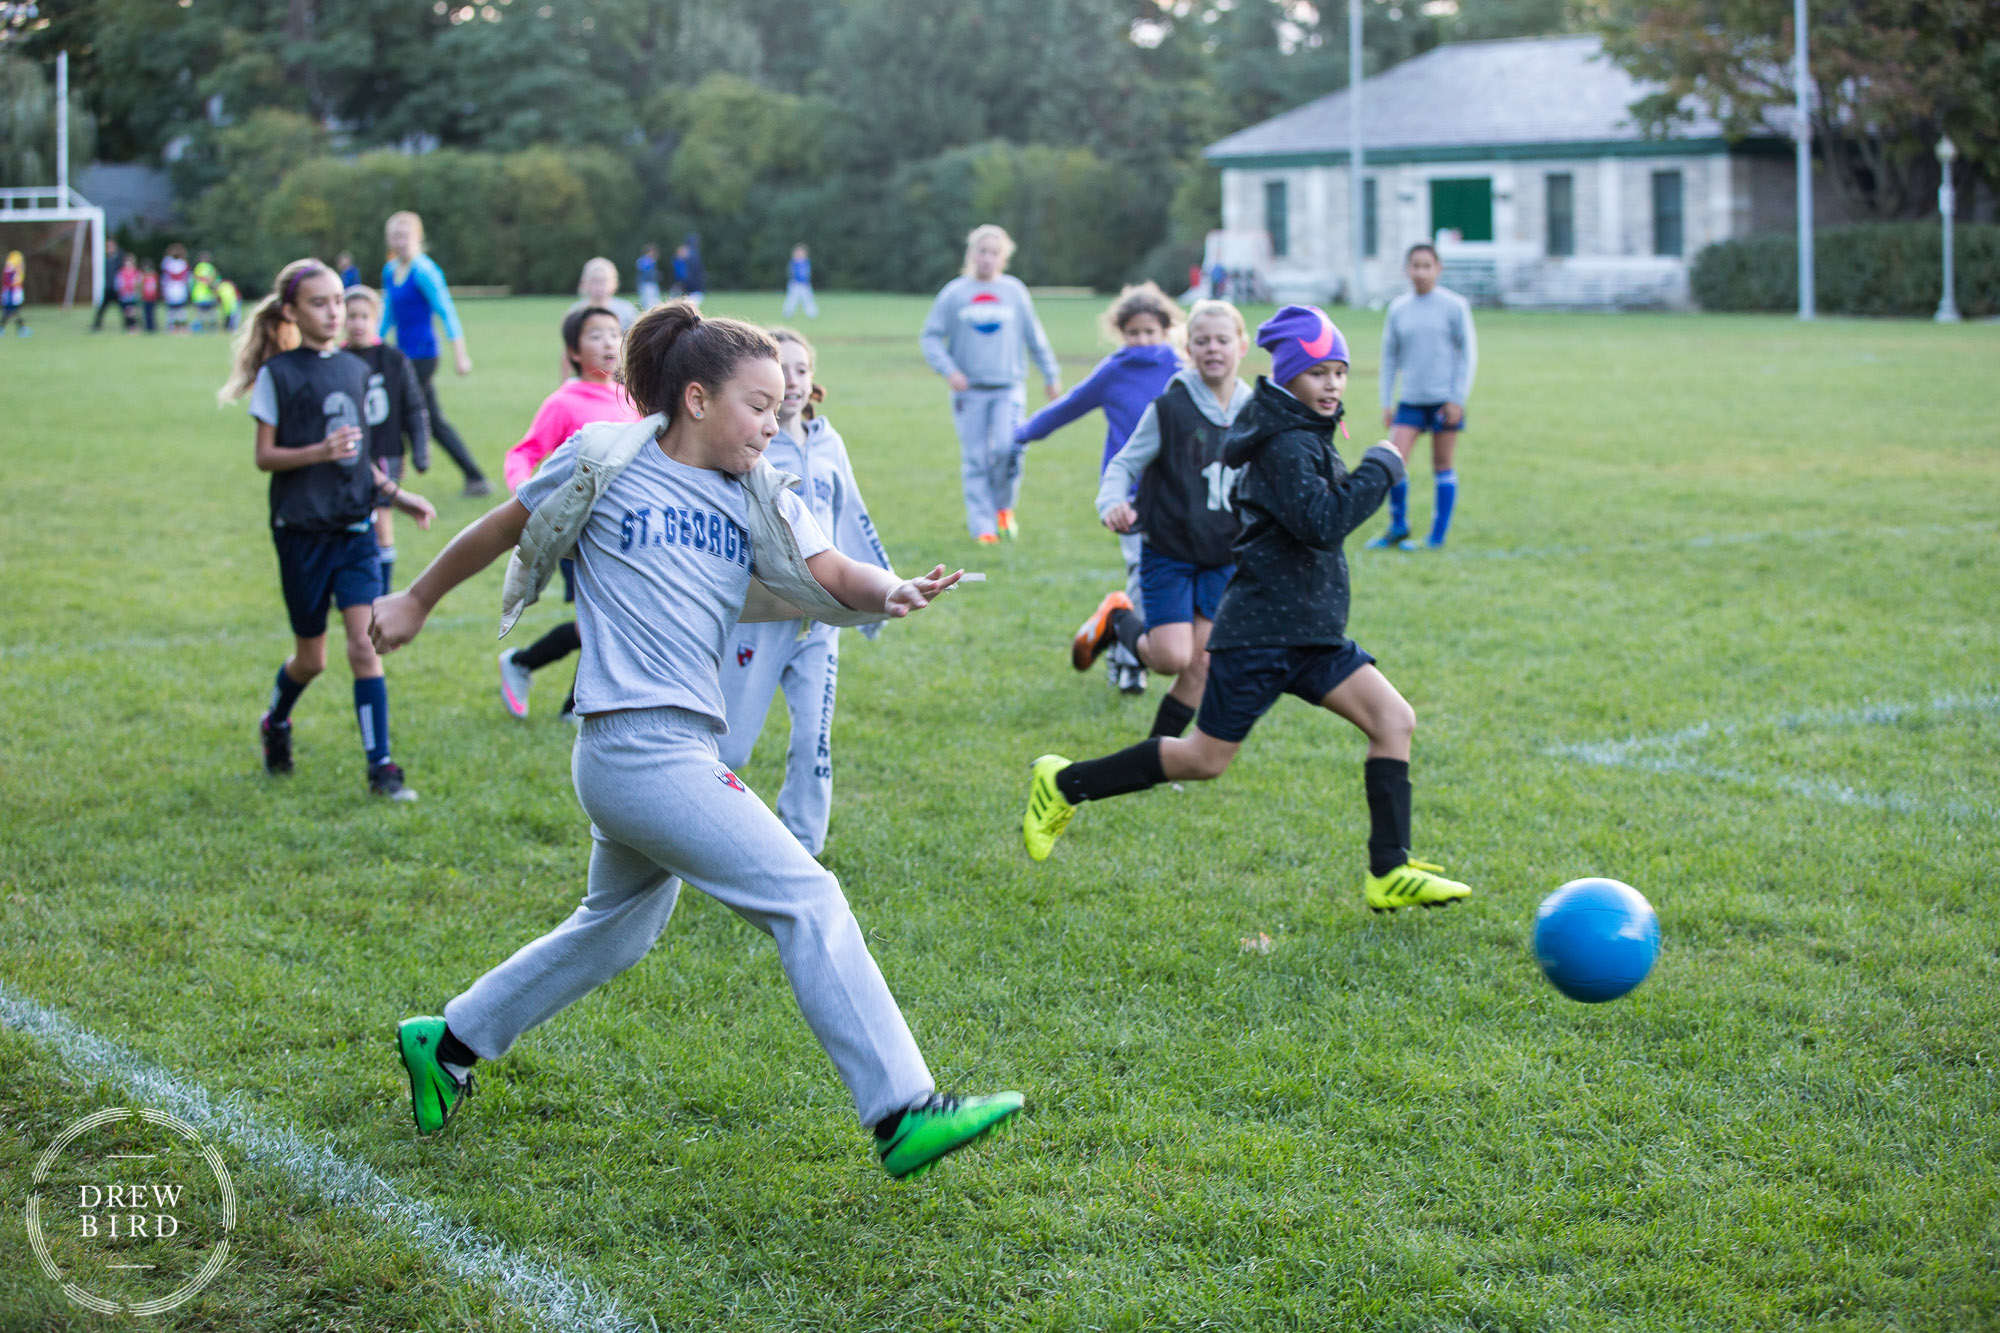 Girls soccer practice in the early morning before school at St. George's School of Montreal in Quebec, Canada. San Francisco independent school photographer and private school marketing photography and brand lifestyle photography by Drew Bird.